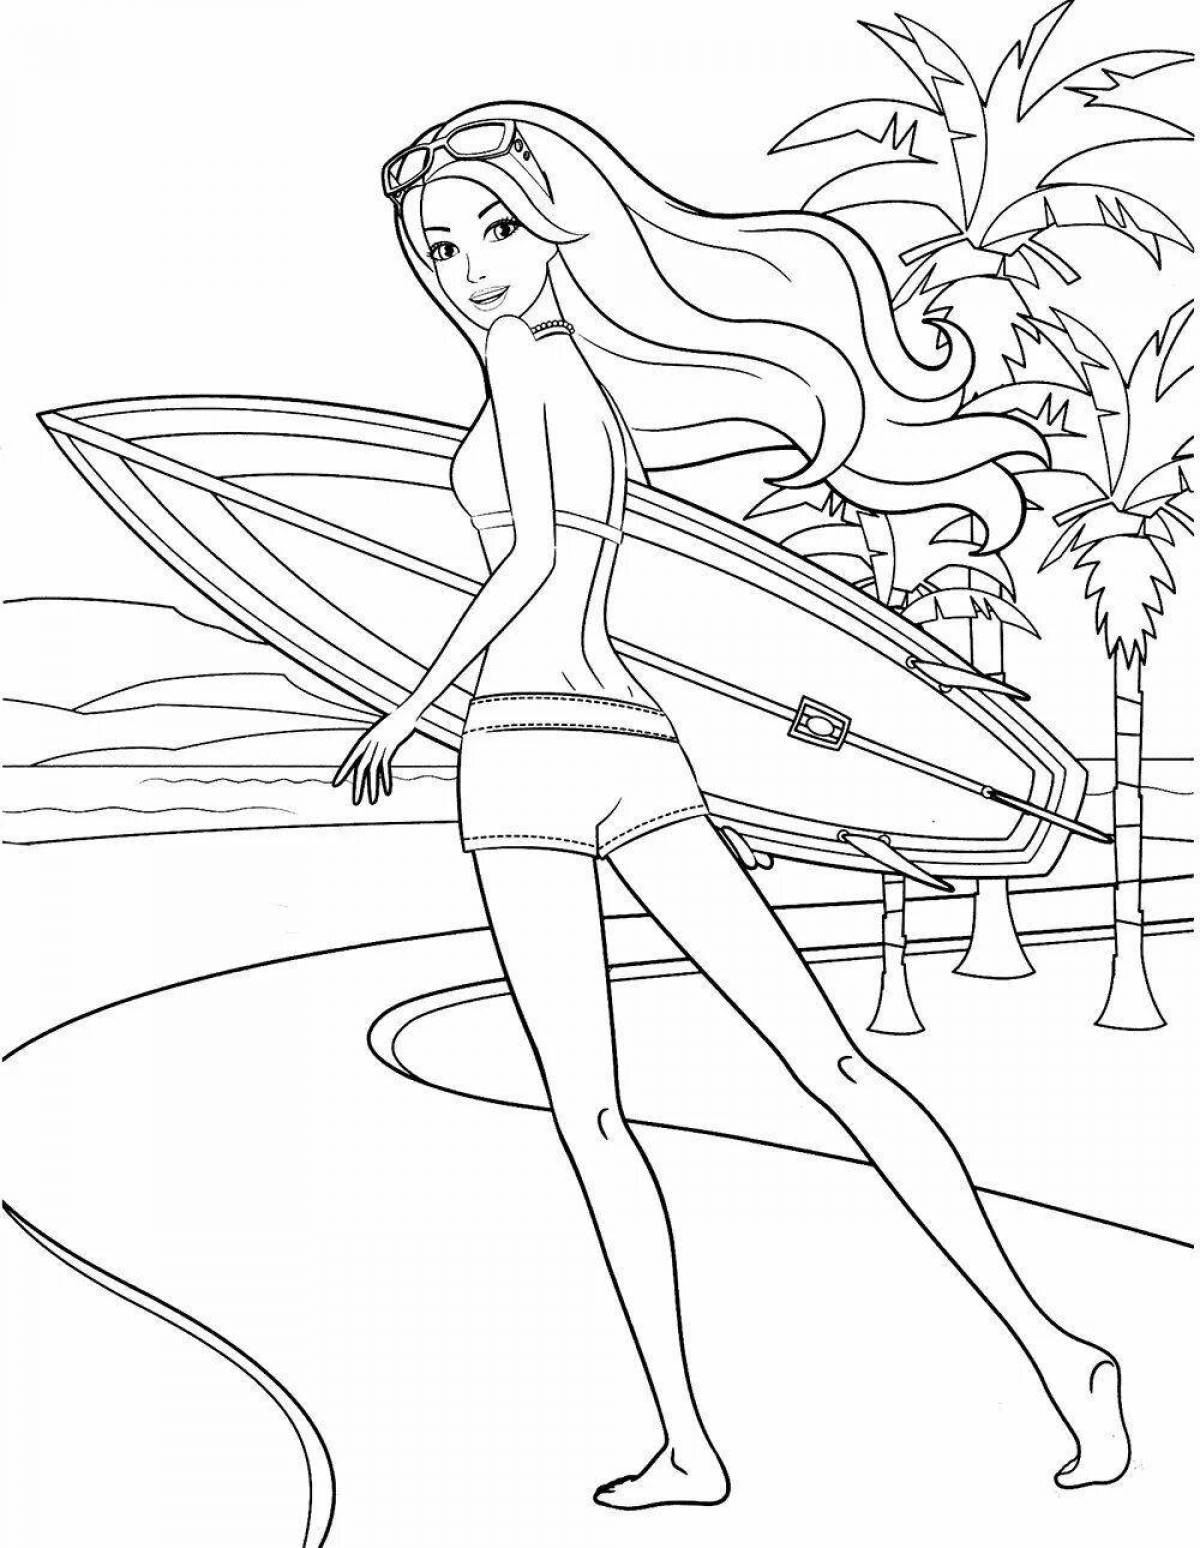 Playful coloring of barbie doll in swimsuit